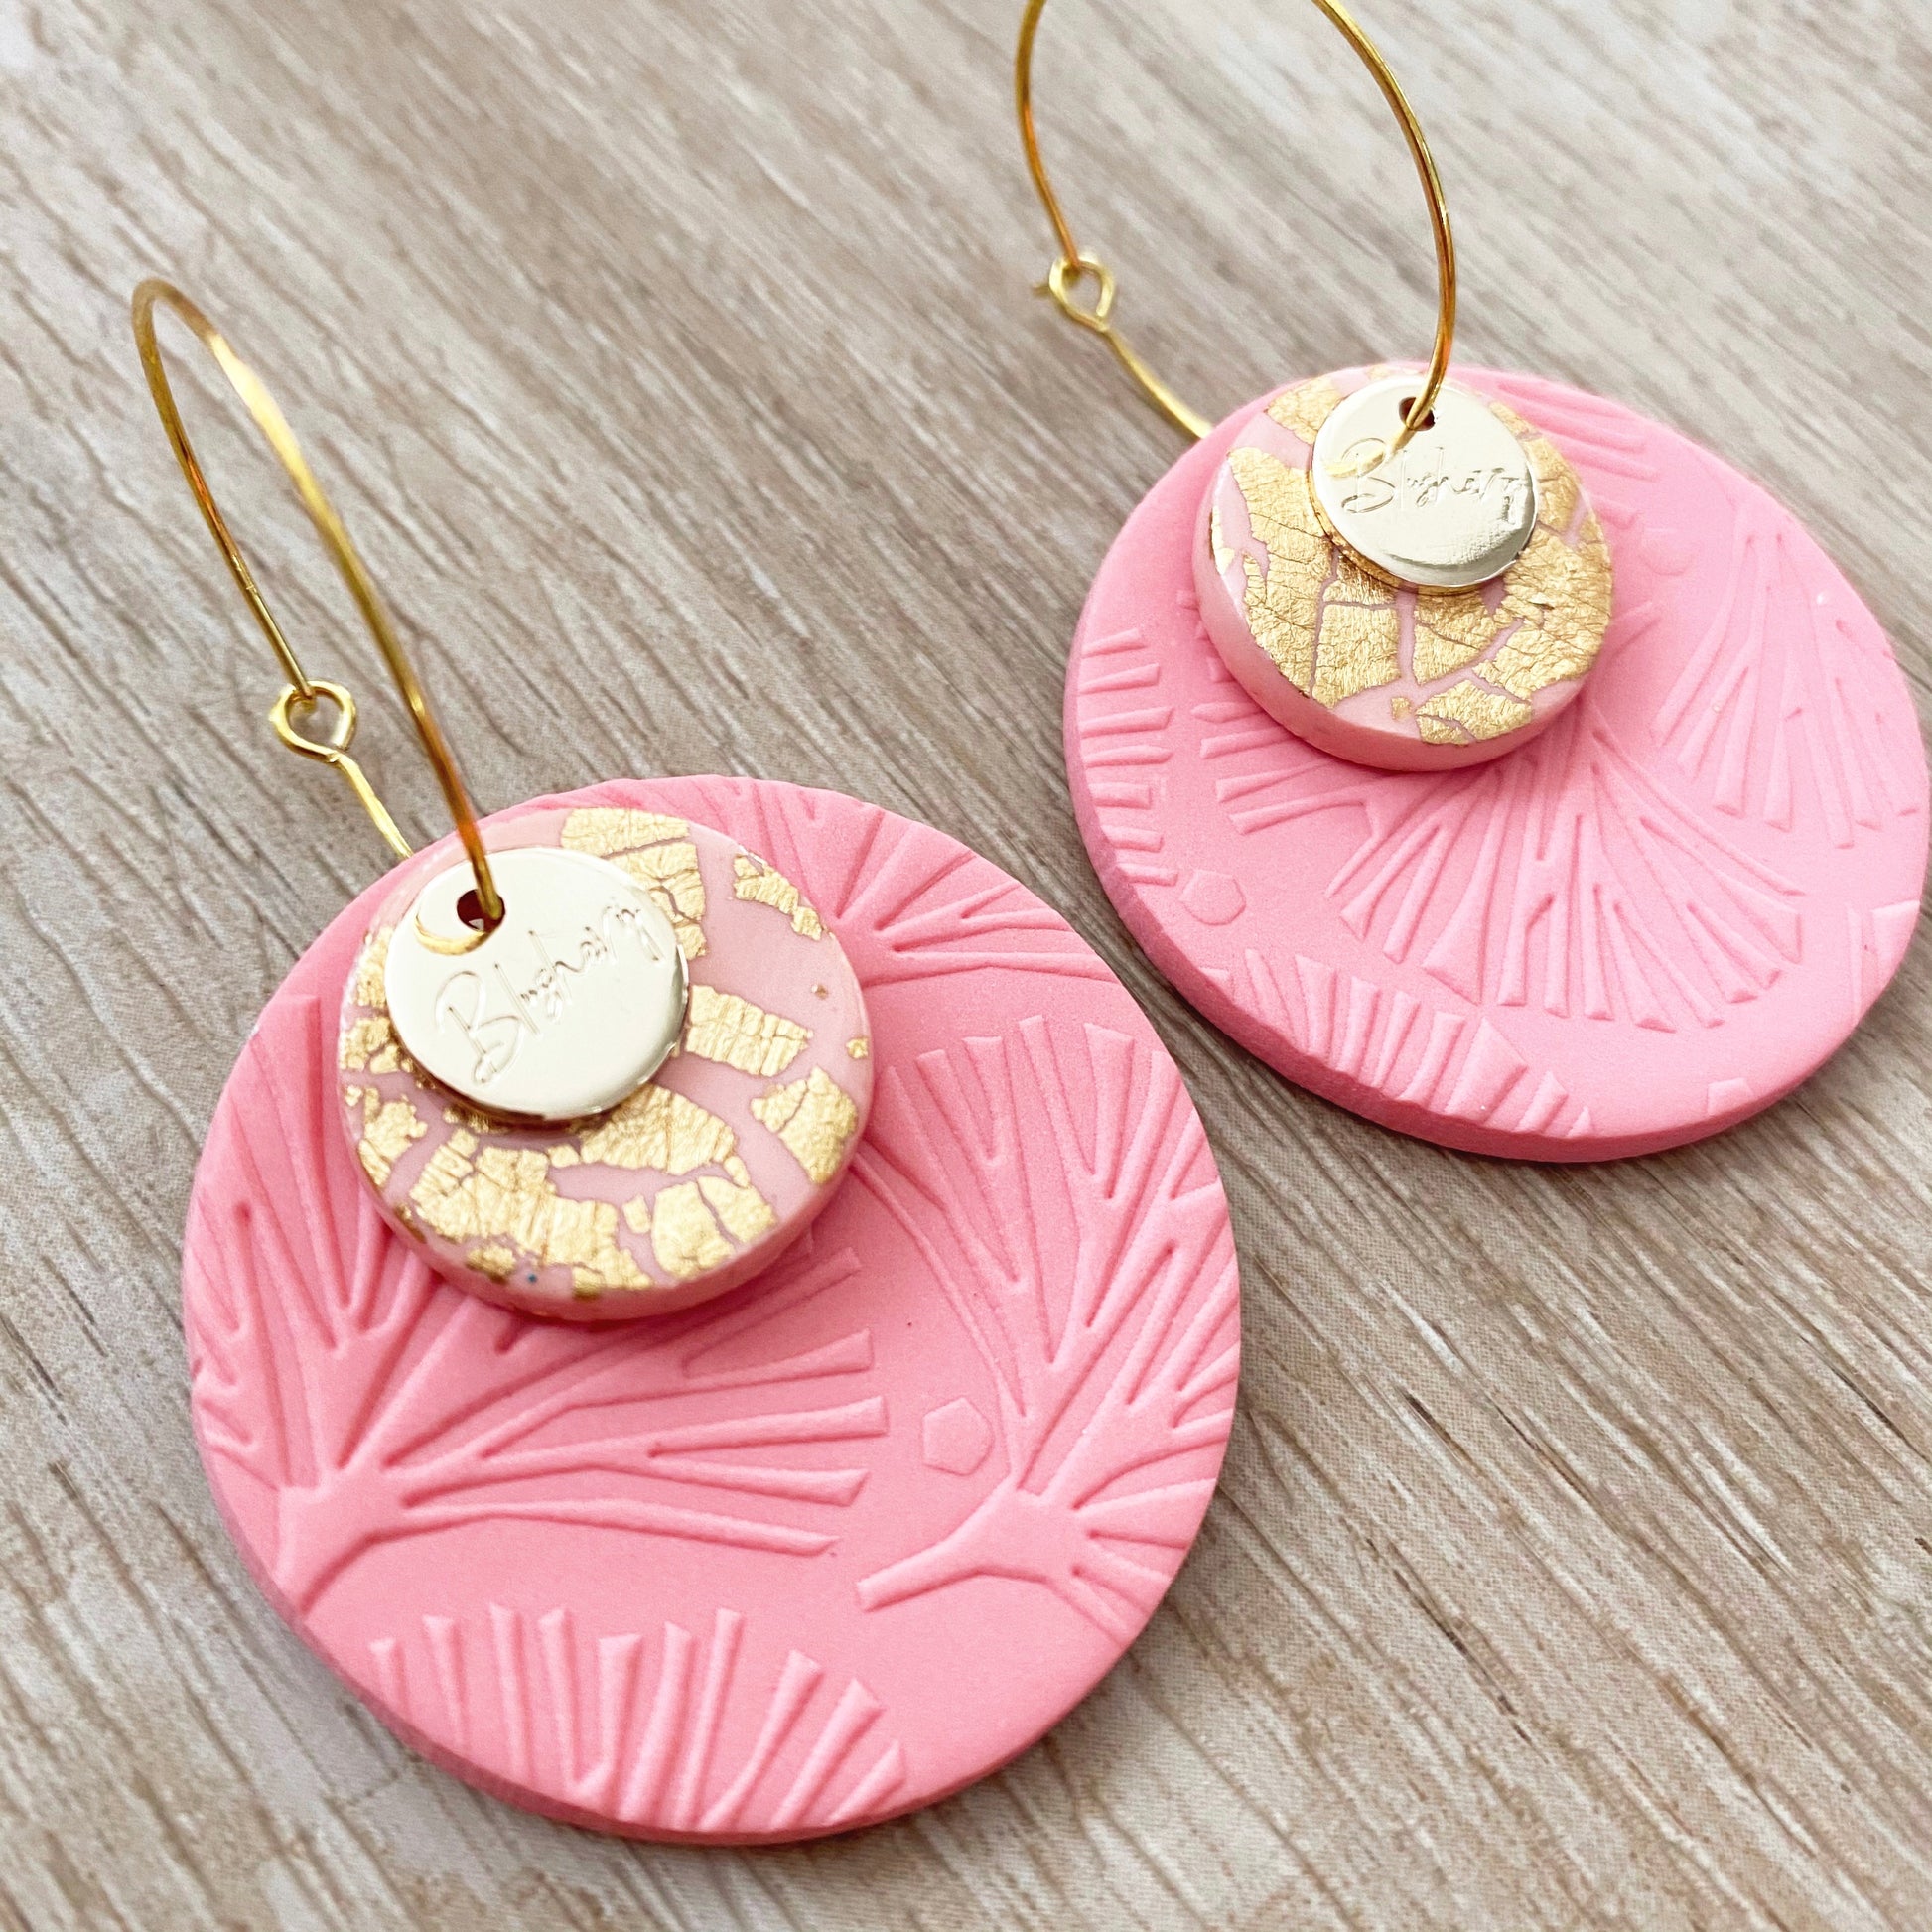 coral pink and gold, foliage leaf floral texture print, stacked discs on a hoop earring